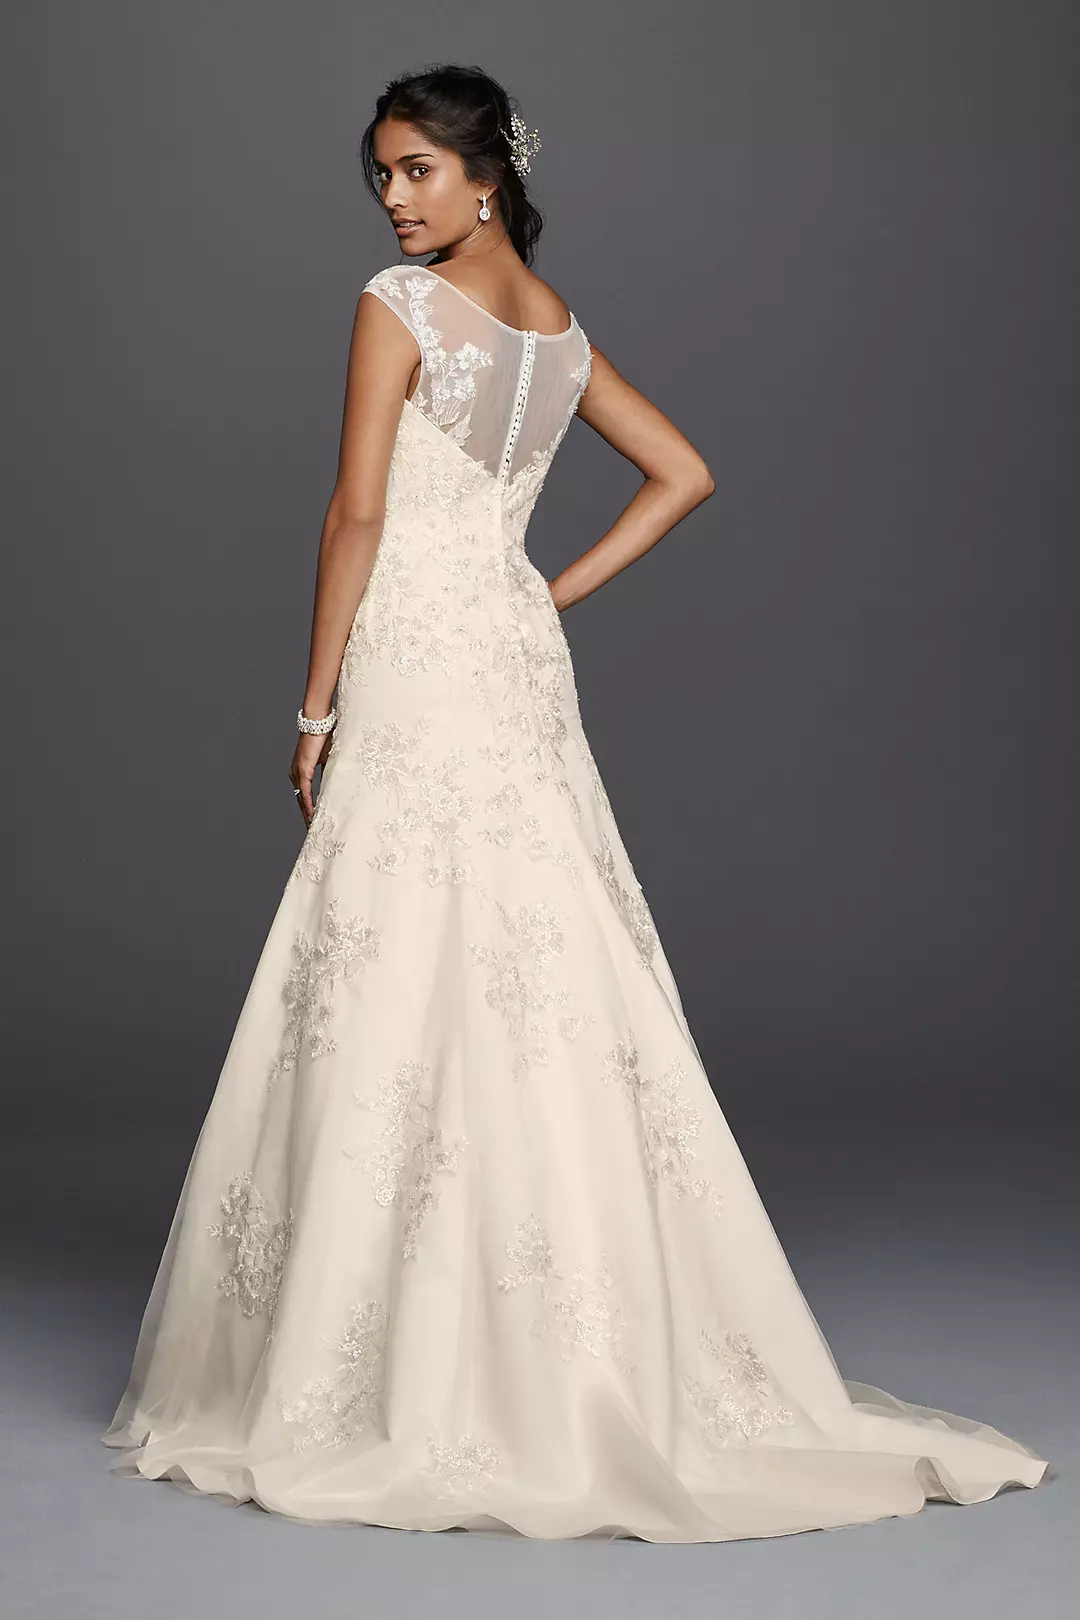 As-Is Tulle Aline Wedding Dress with Lace Applique Image 2